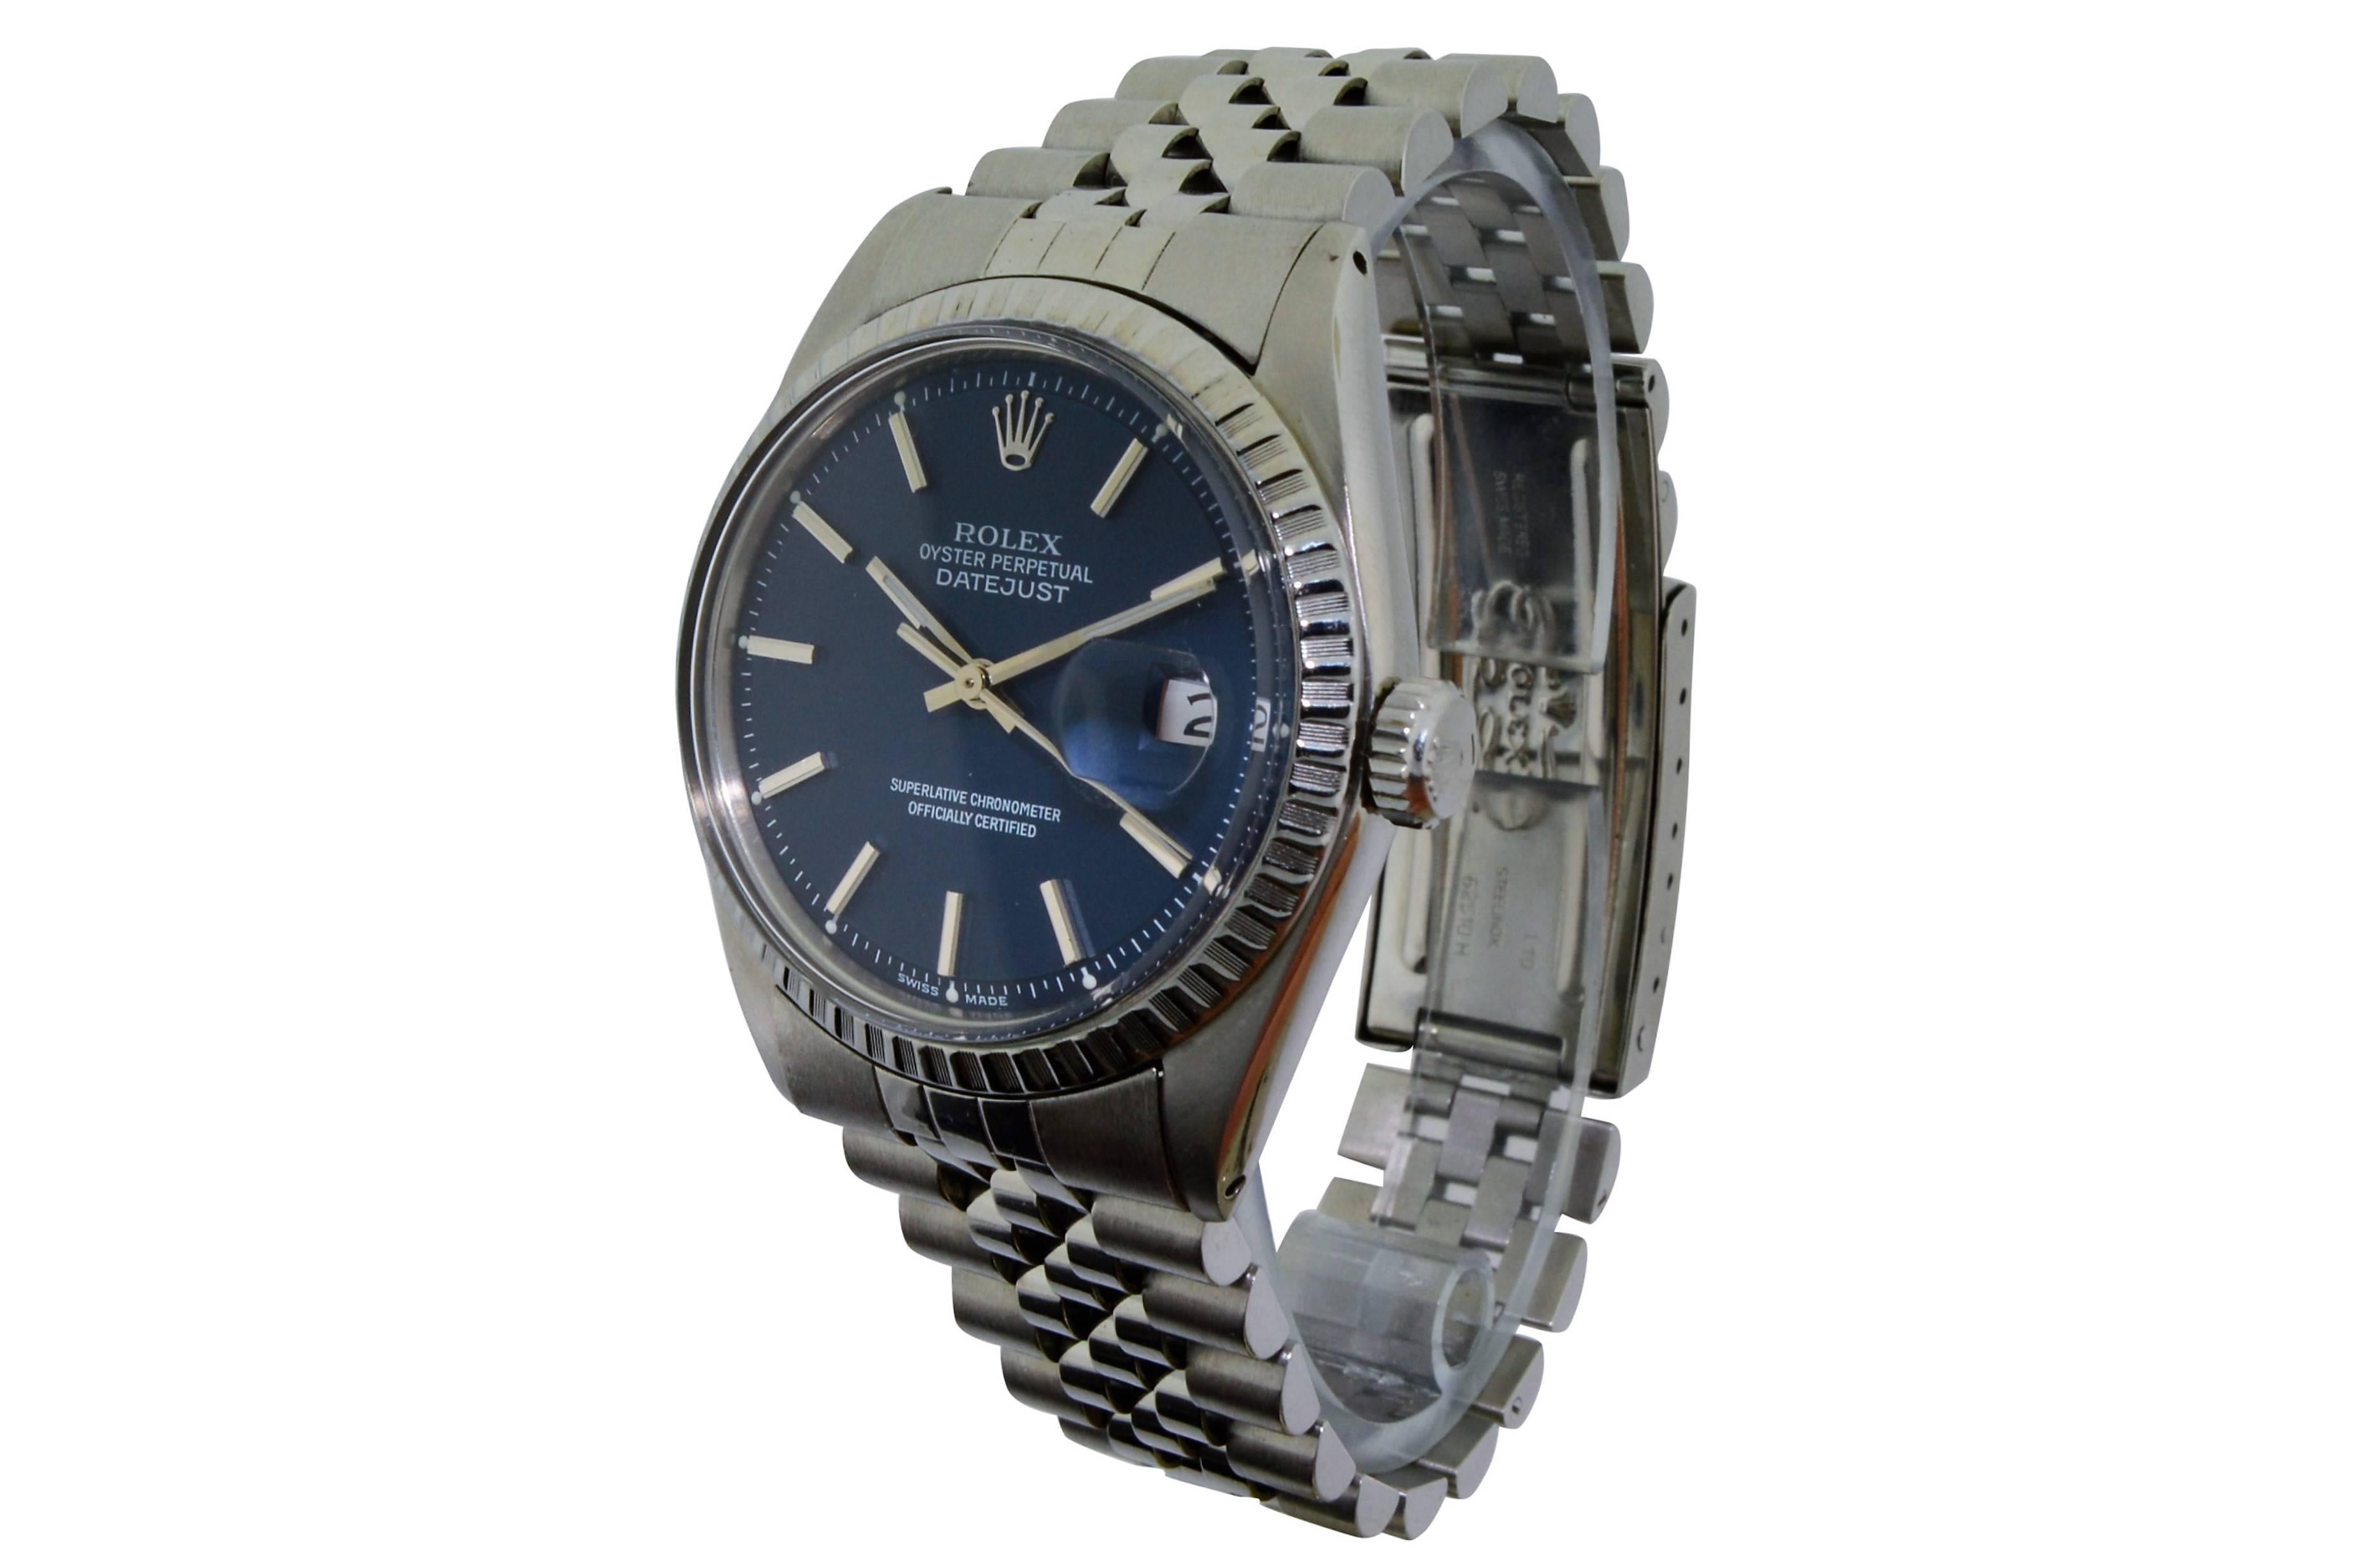 FACTORY / HOUSE: Rolex Watch Company
STYLE / REFERENCE: Datejust, 1601
MOVEMENT / CALIBER: 1570, 26 Jewels
DIAL / HANDS: Original, Blue With Batons, Baton Hands
DIMENSIONS: 36mm X 43mm
ATTACHMENT / LENGTH:  Stainless Steel Jubilee Bracelet, Full